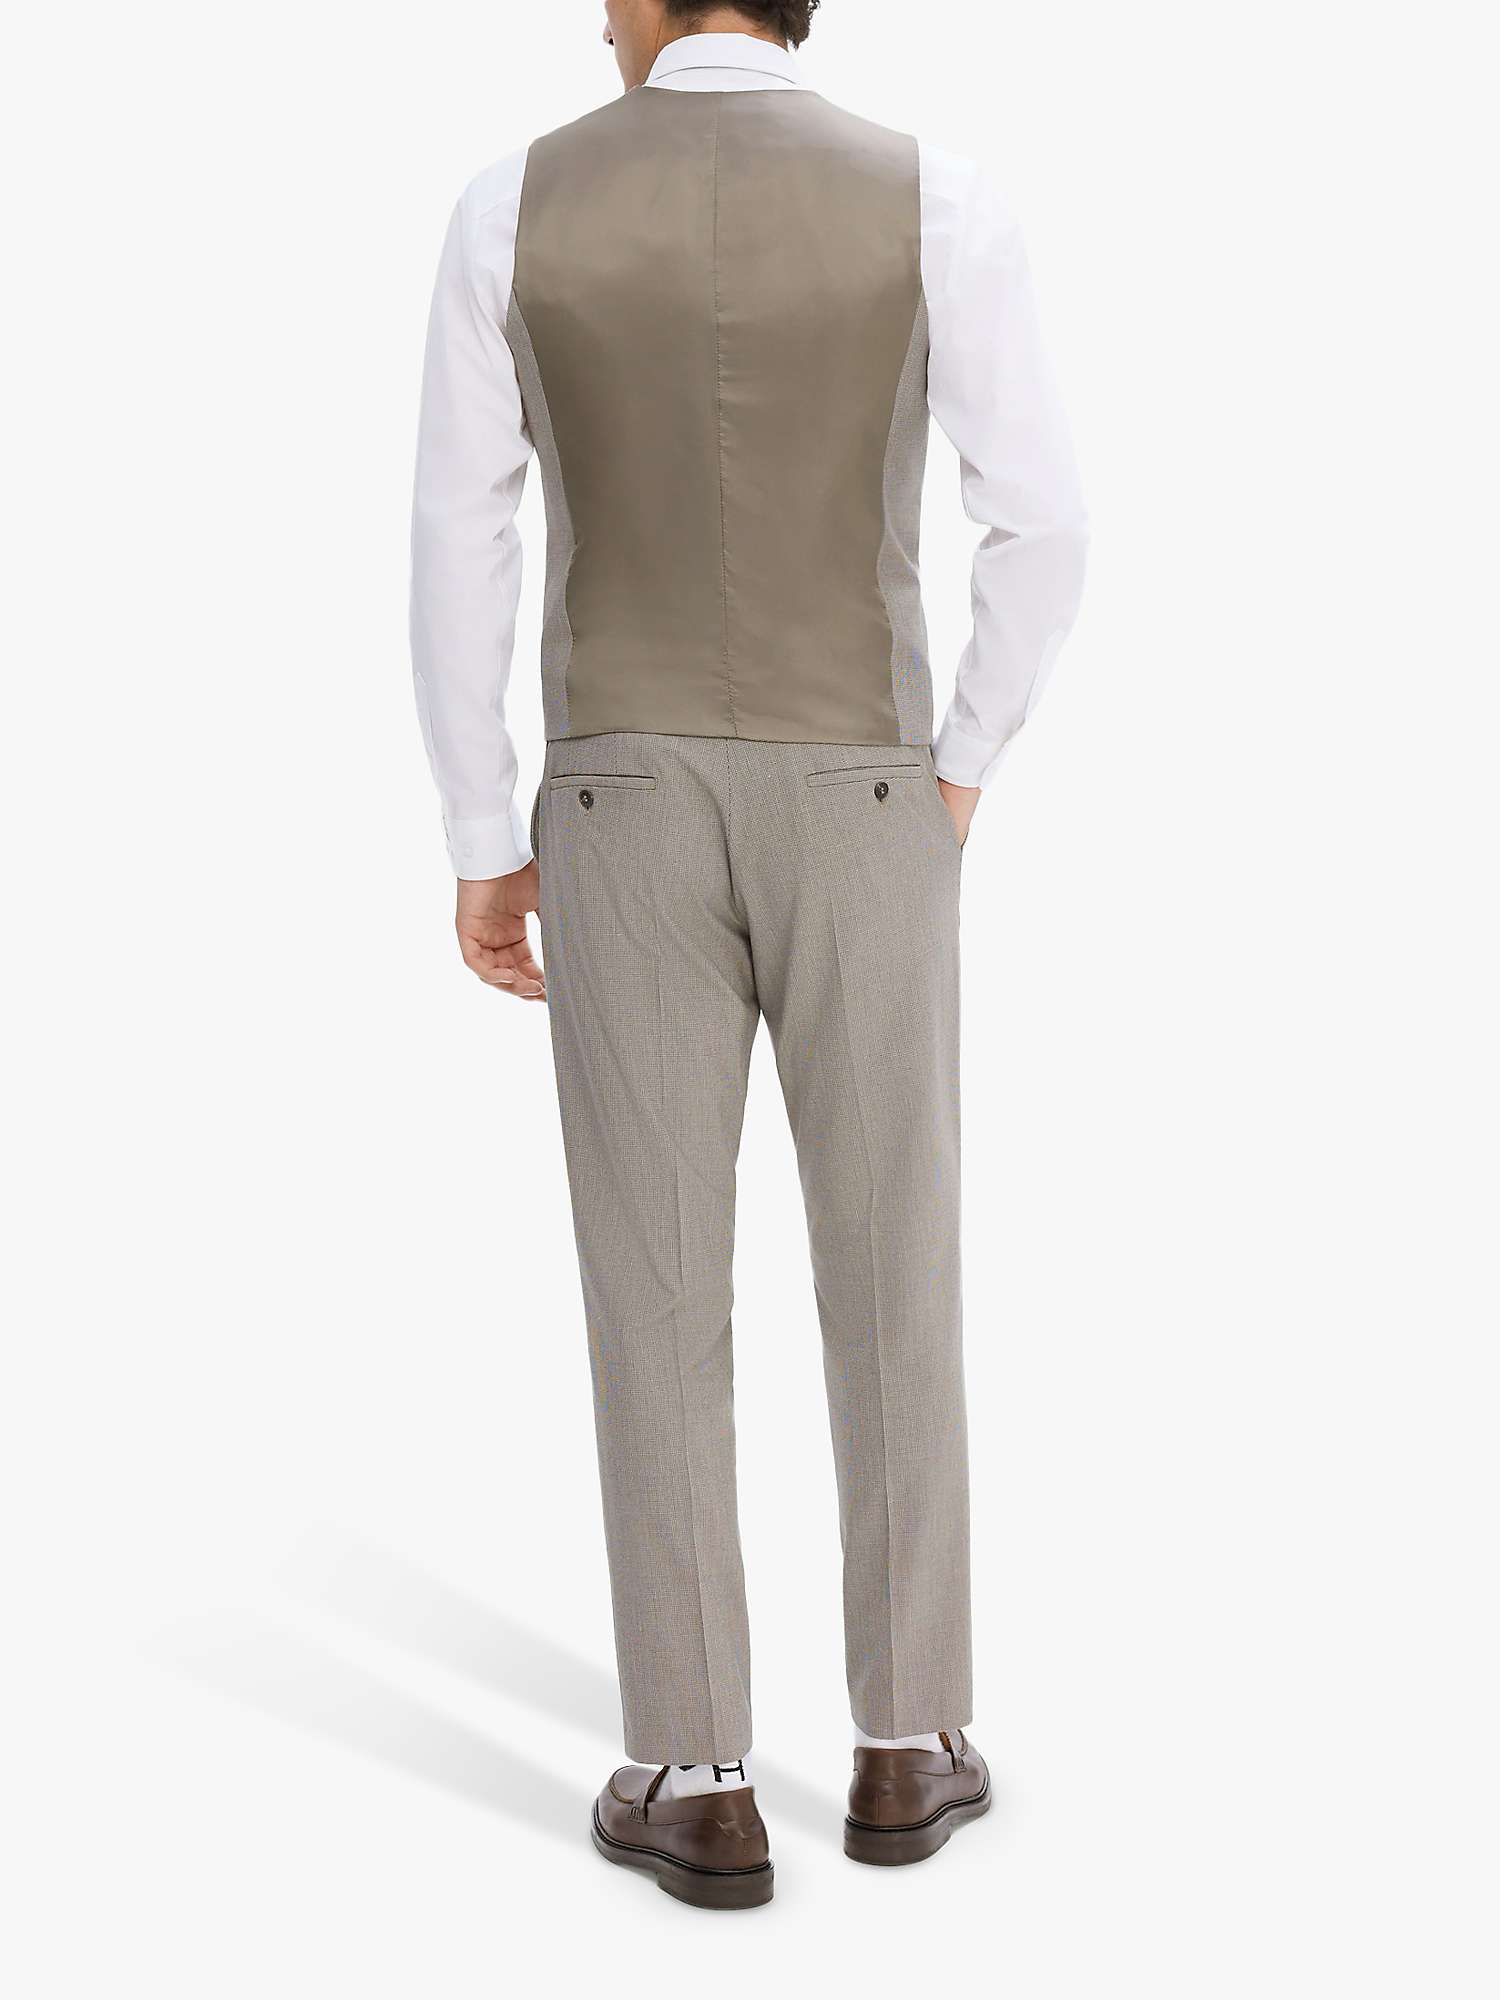 Buy SELECTED HOMME Tailored Fit Waistcoat, Light Brown Online at johnlewis.com